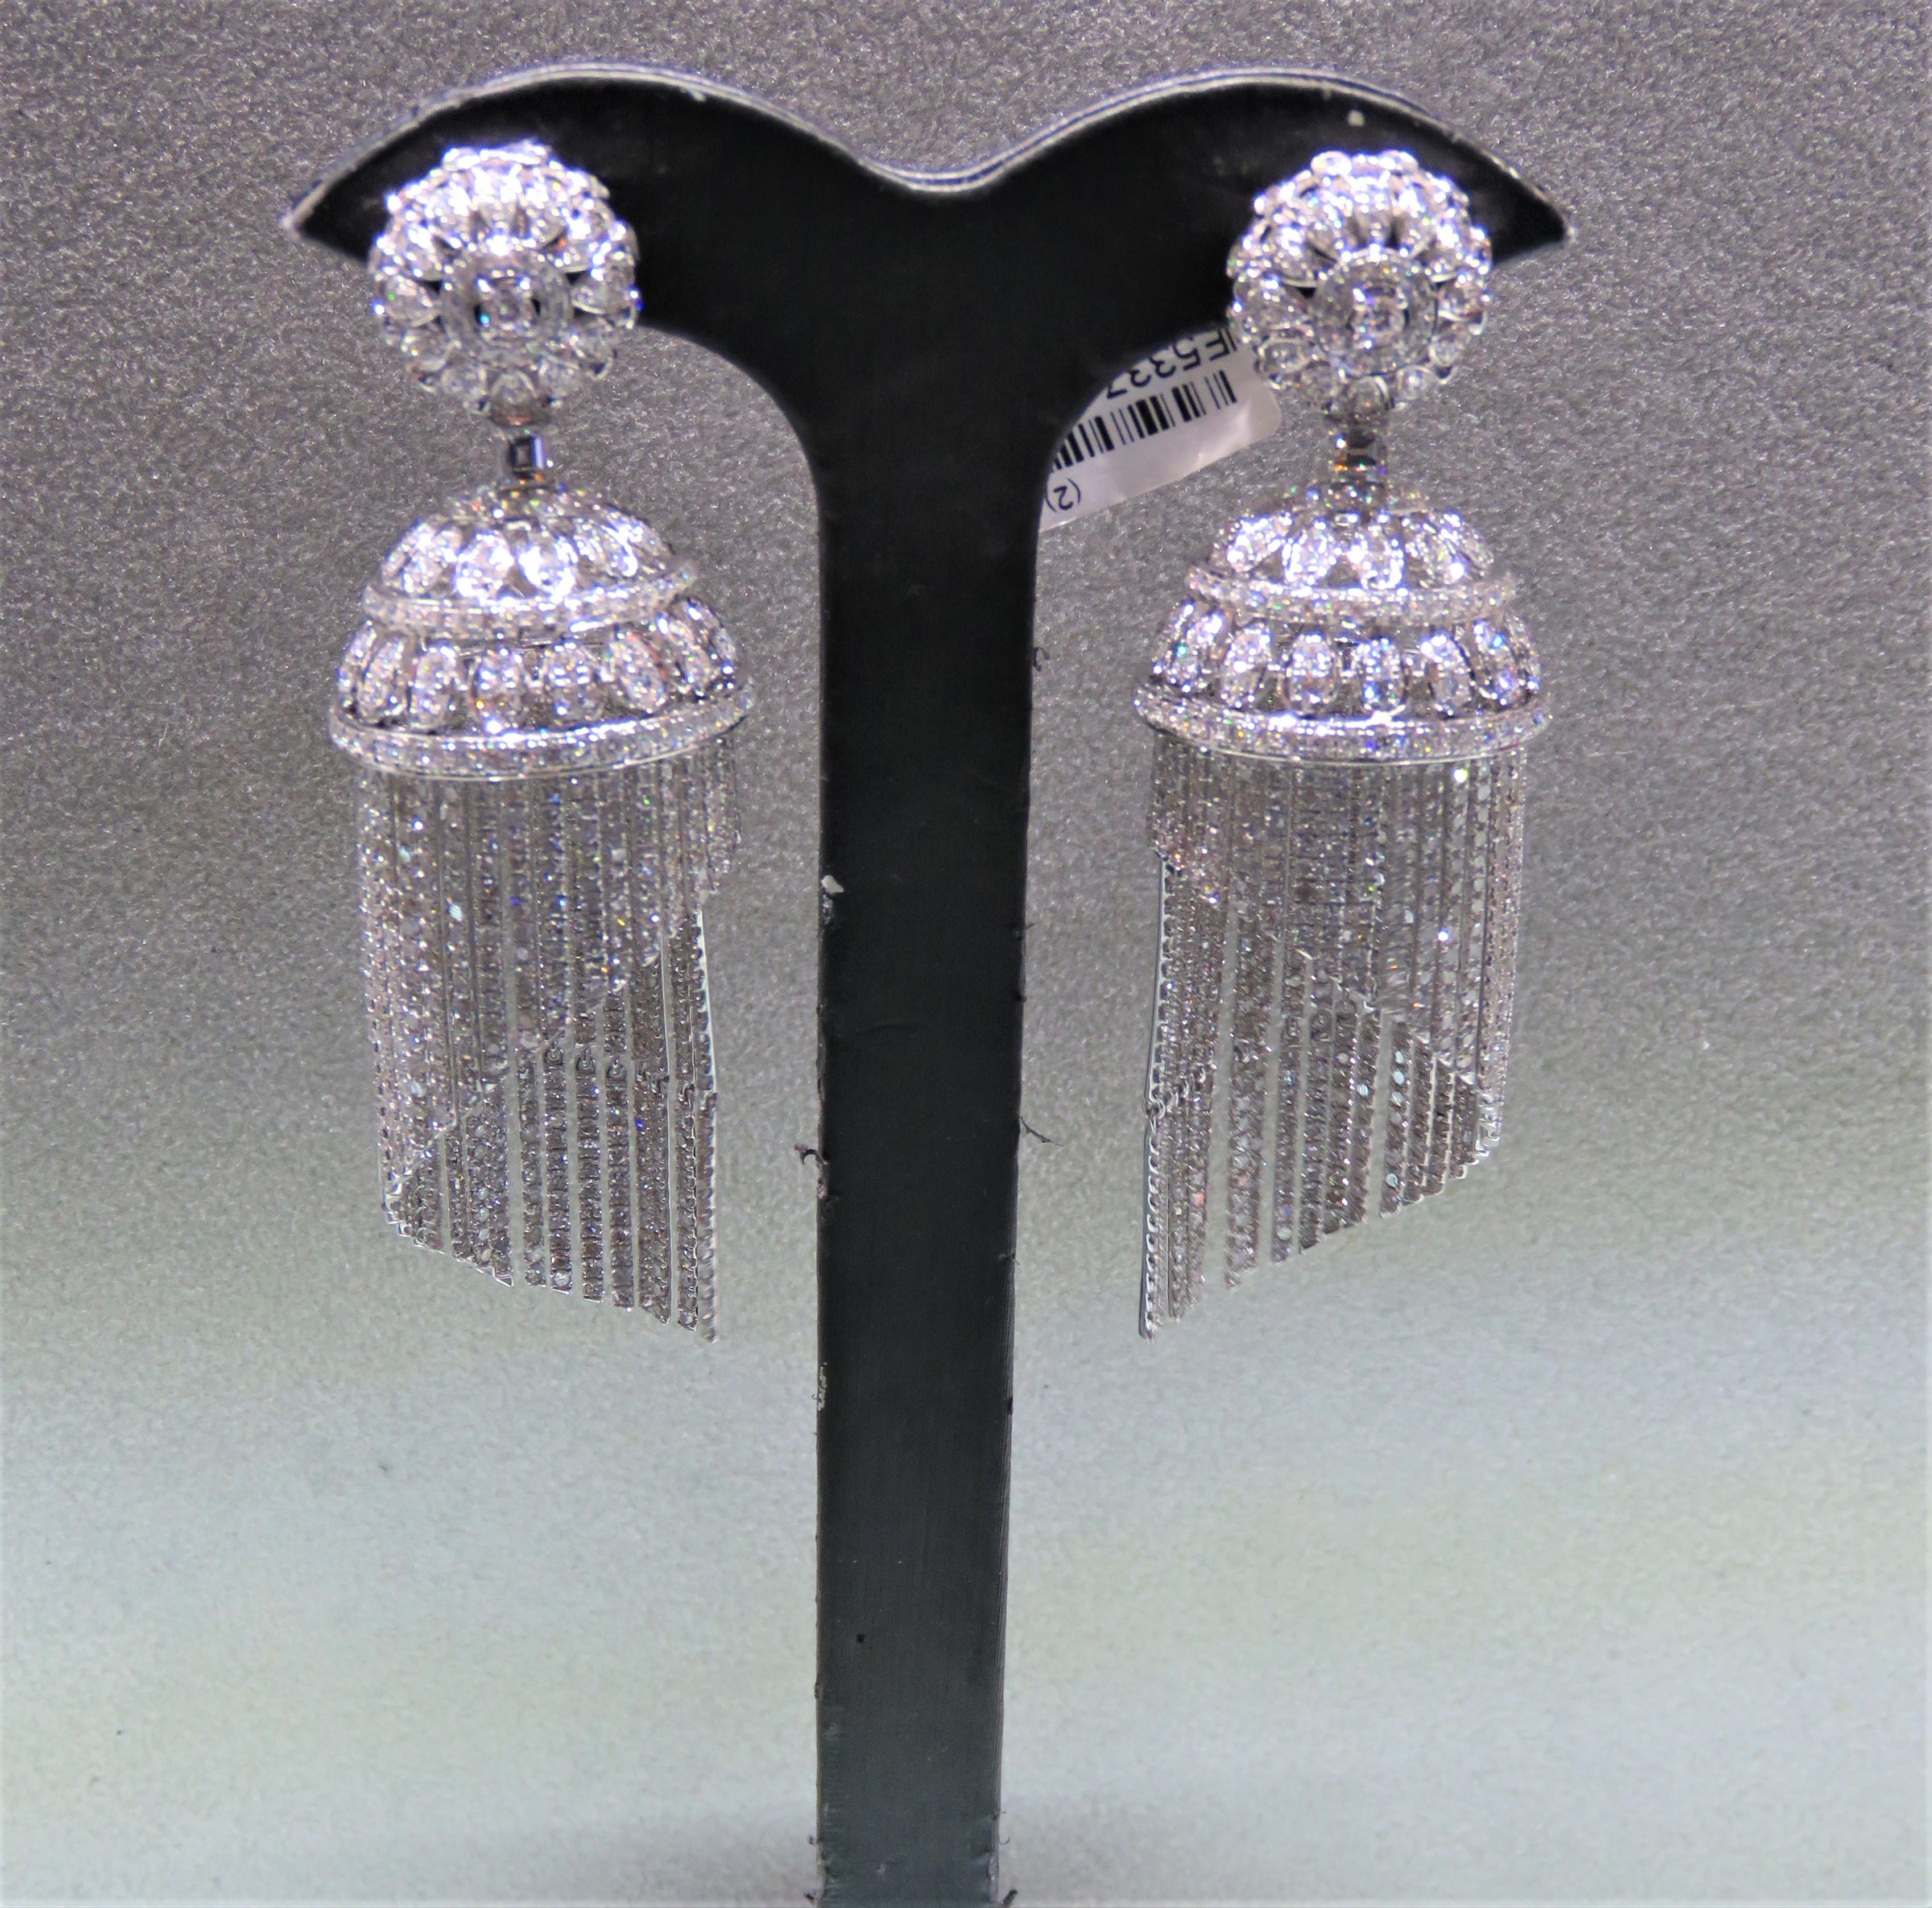 The Following Items we are offering is a Rare Important Radiant 18KT Gold Glamorous and Elaborate Rare Magnificent Glittering Diamond Fringe Design Earrings. Earrings feature RARE HANDSET SPARKLING DIAMONDS set in 18KT GOLD! T.C.W. Approx 15CTS!!